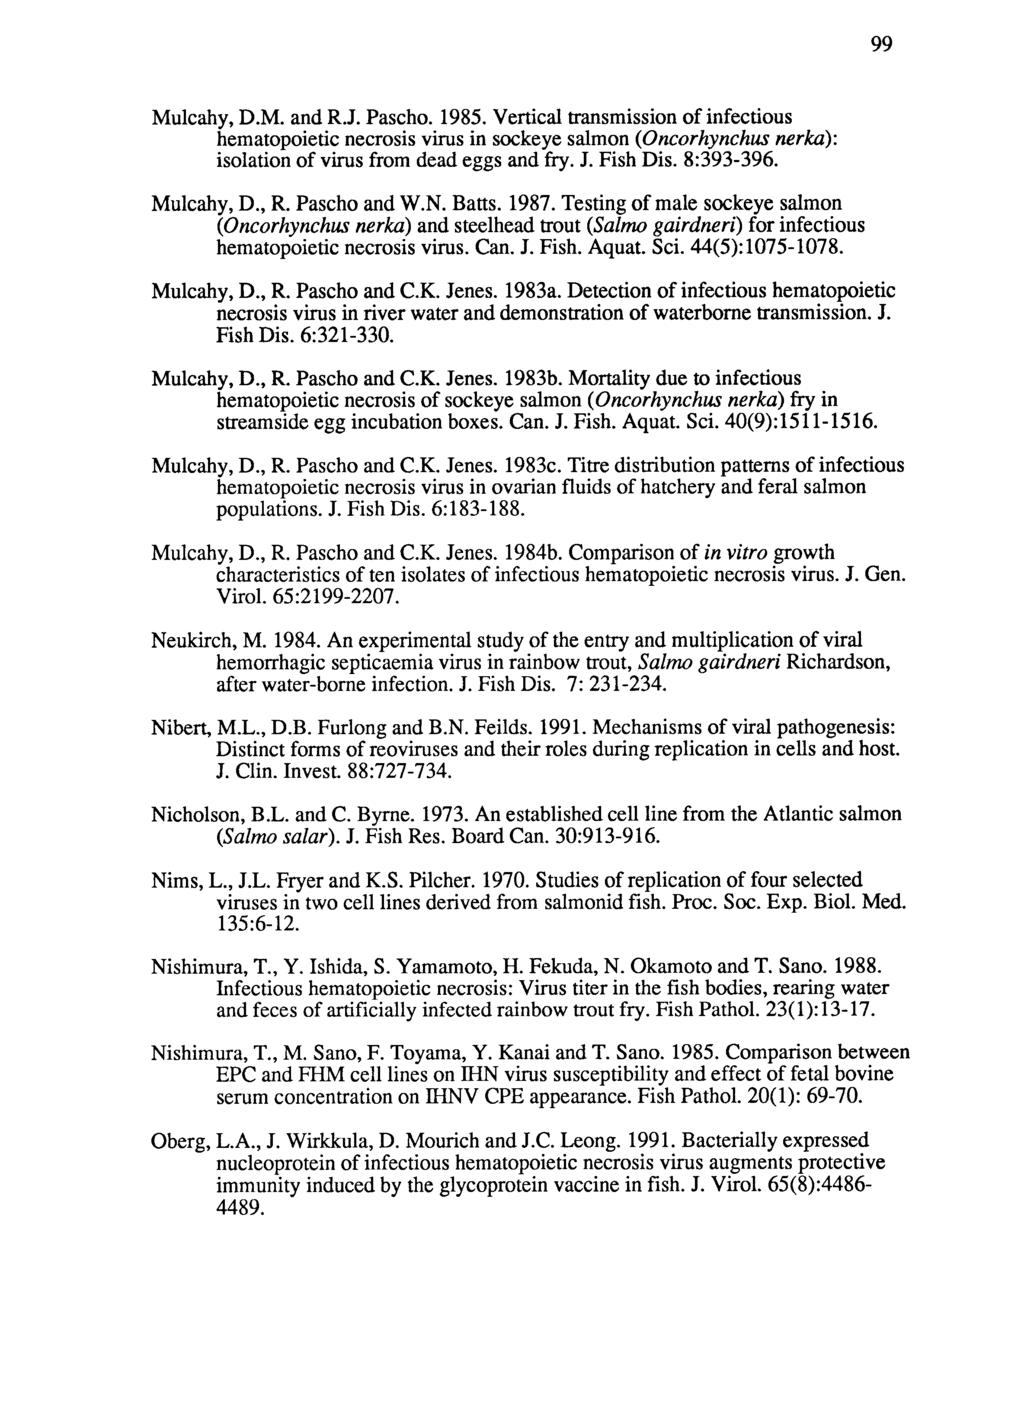 99 Mulcahy, D.M. and R.J. Pascho. 1985. Vertical transmission of infectious hematopoietic necrosis virus in sockeye salmon (Oncorhynchus nerka): isolation of virus from dead eggs and fry. J. Fish Dis.